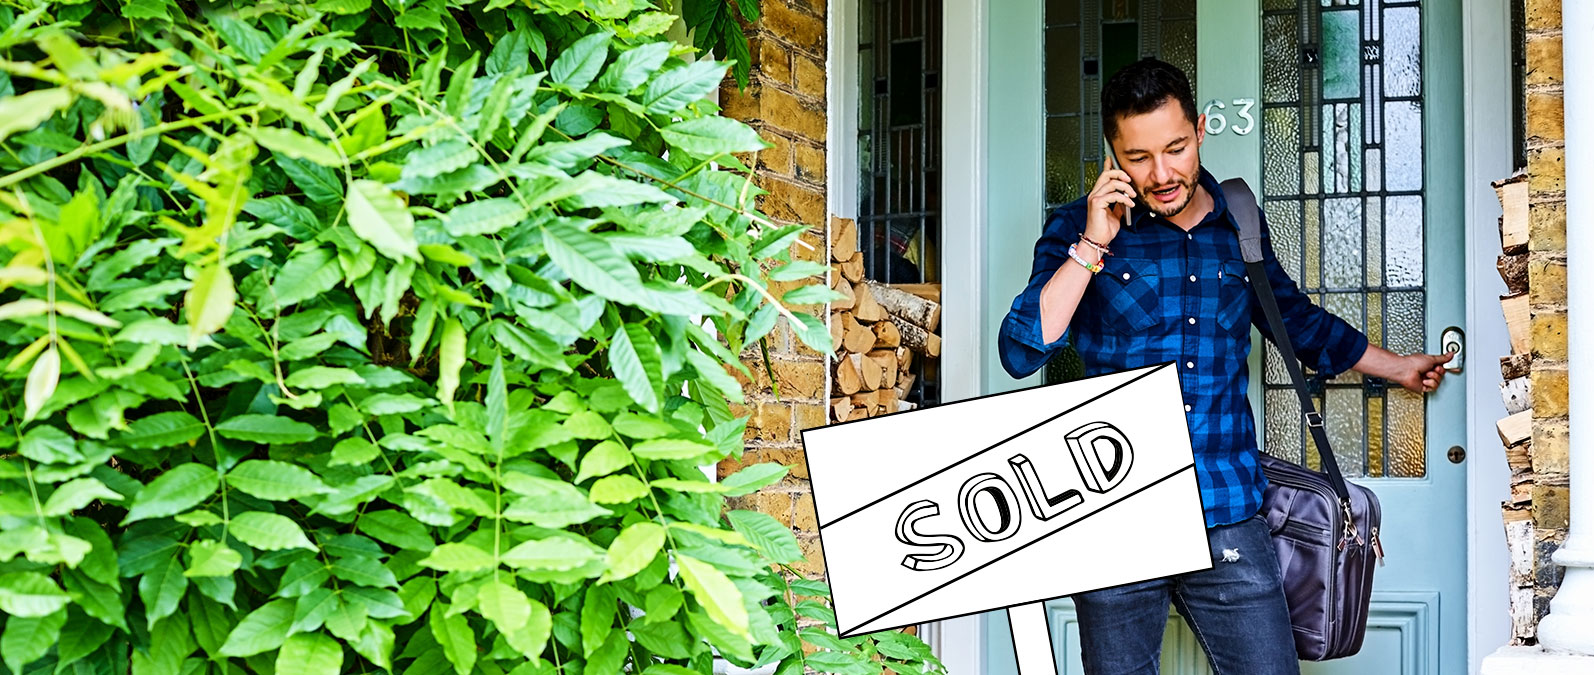 Real estate agent walks out the front door of a house while talking on mobile phone